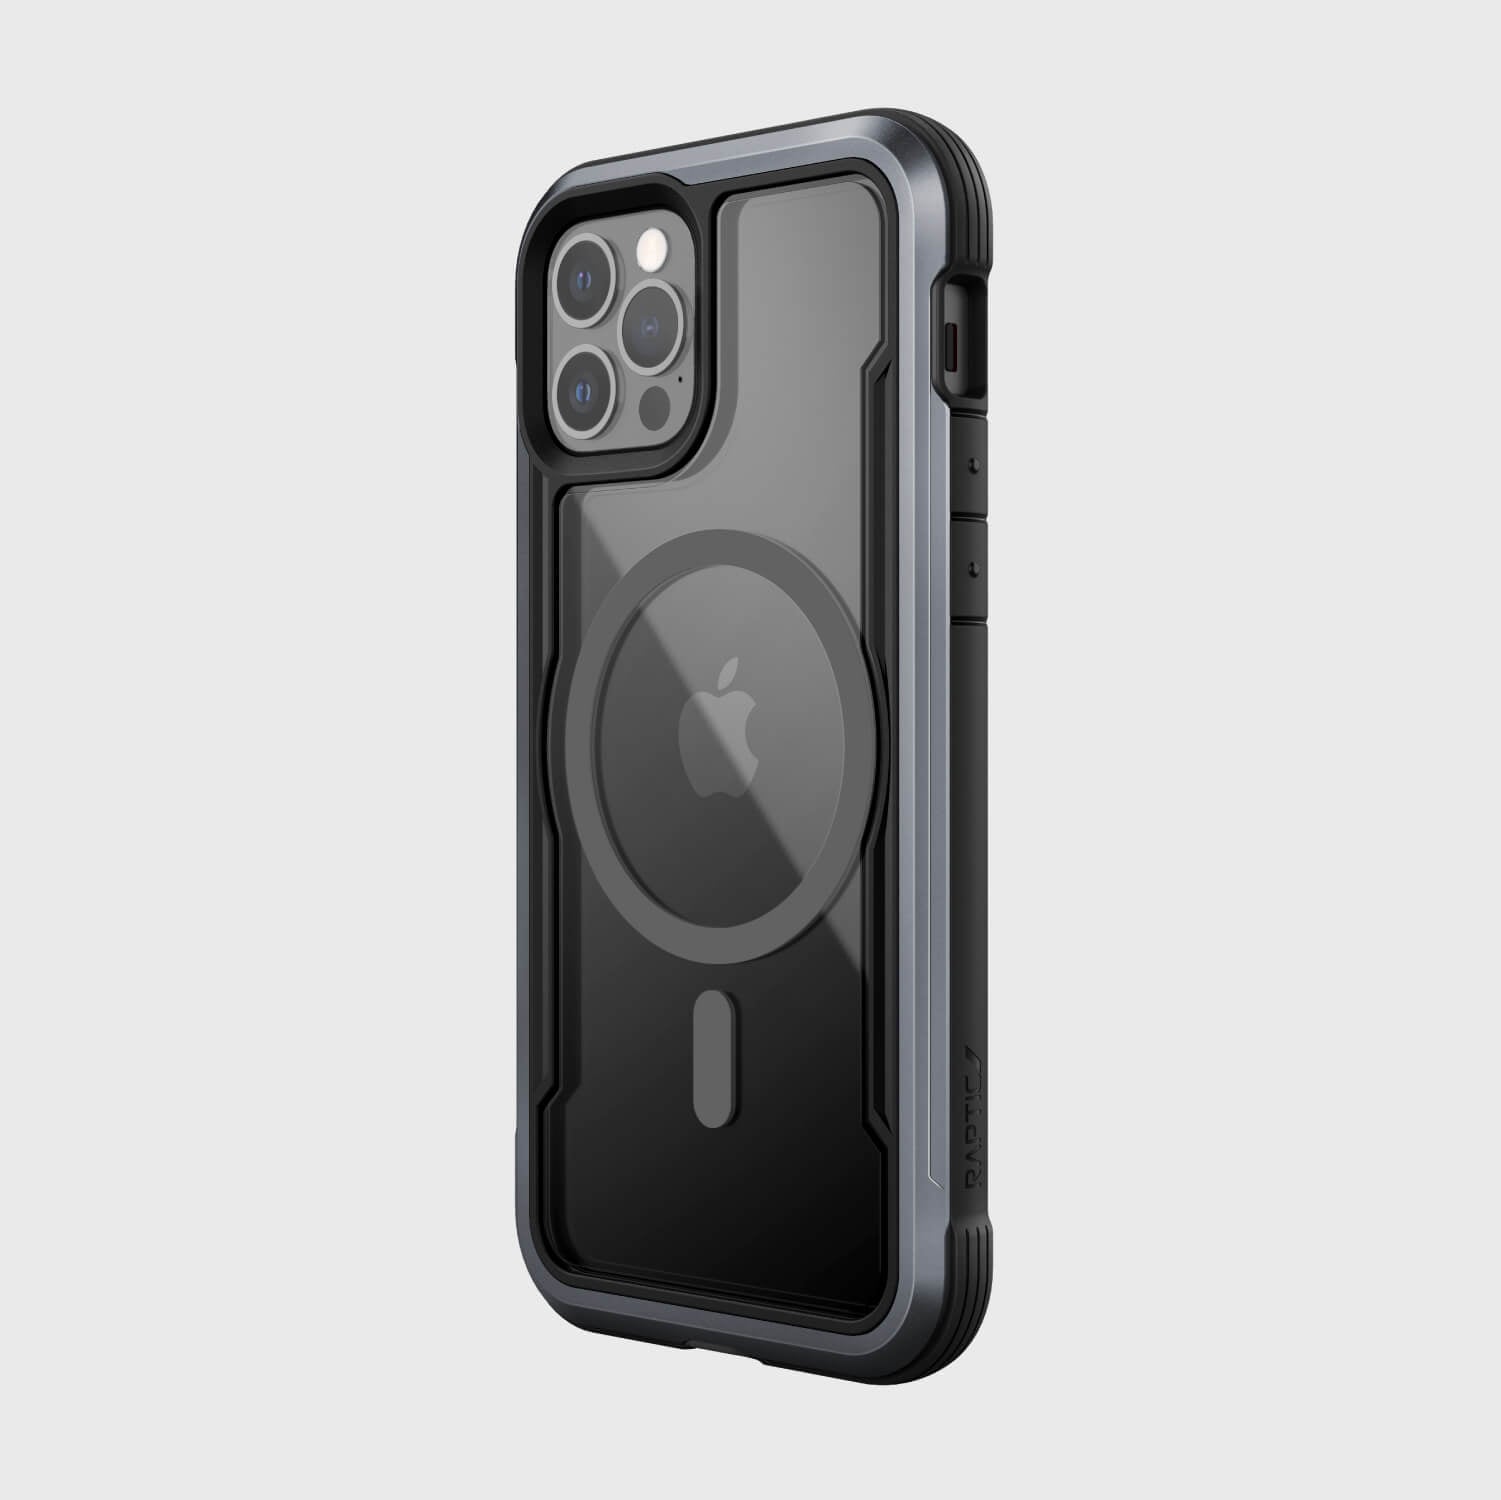 The iPhone 12 Pro Max Case - SHIELD PRO MAGNET, compatible with MagSafe chargers, is shown in black by Raptic.